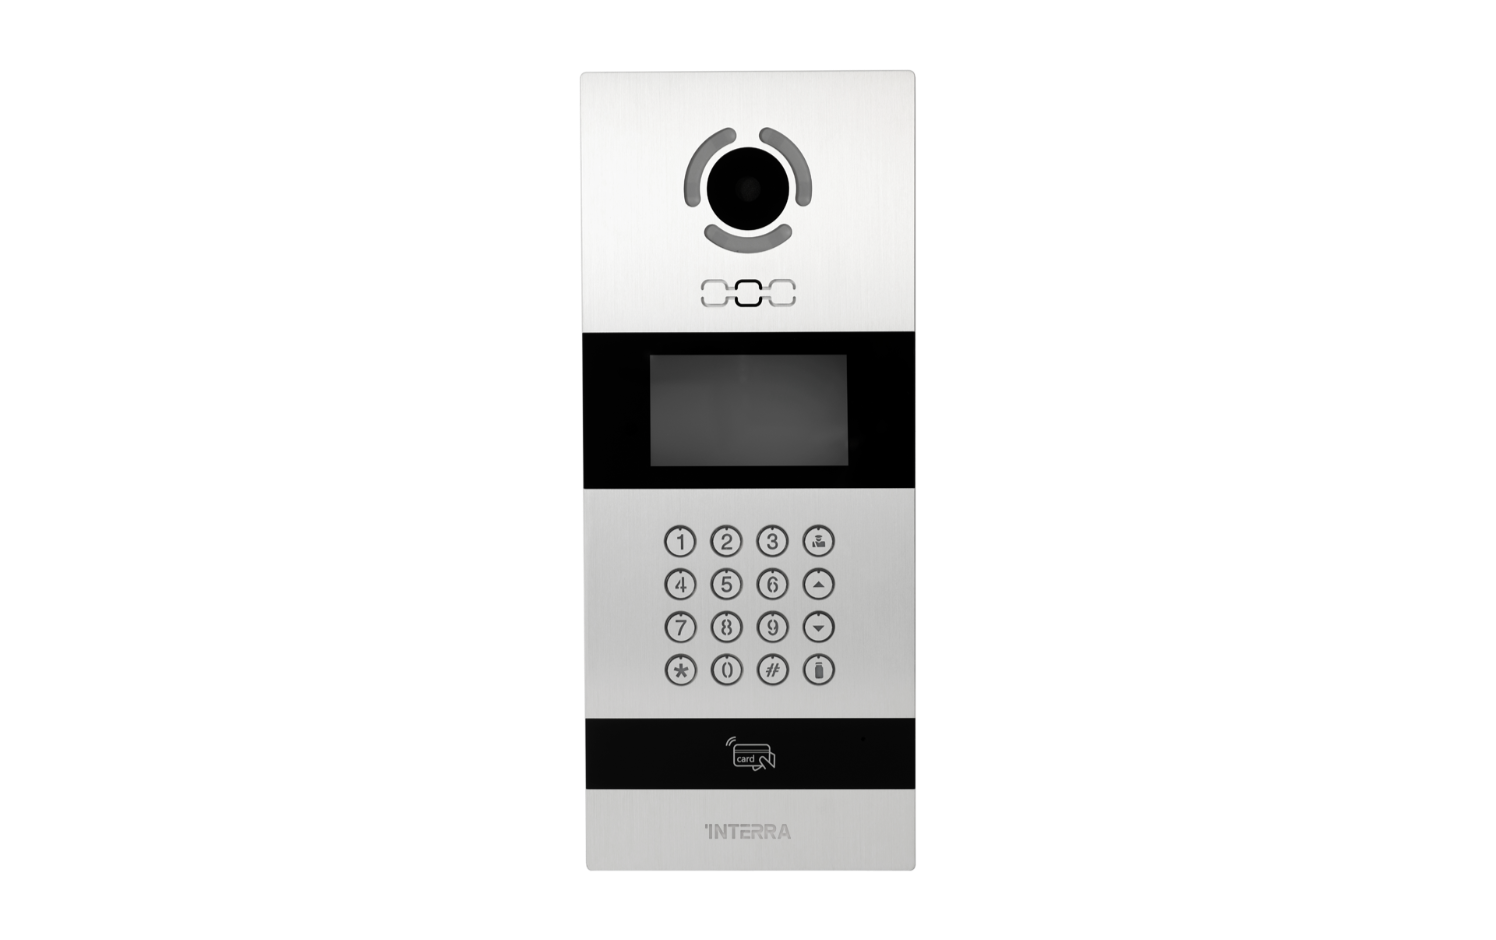 Linux Outdoor Video Intercom - 4.3" Color TFT LCD - Aluminium Body with Mechanical Buttons